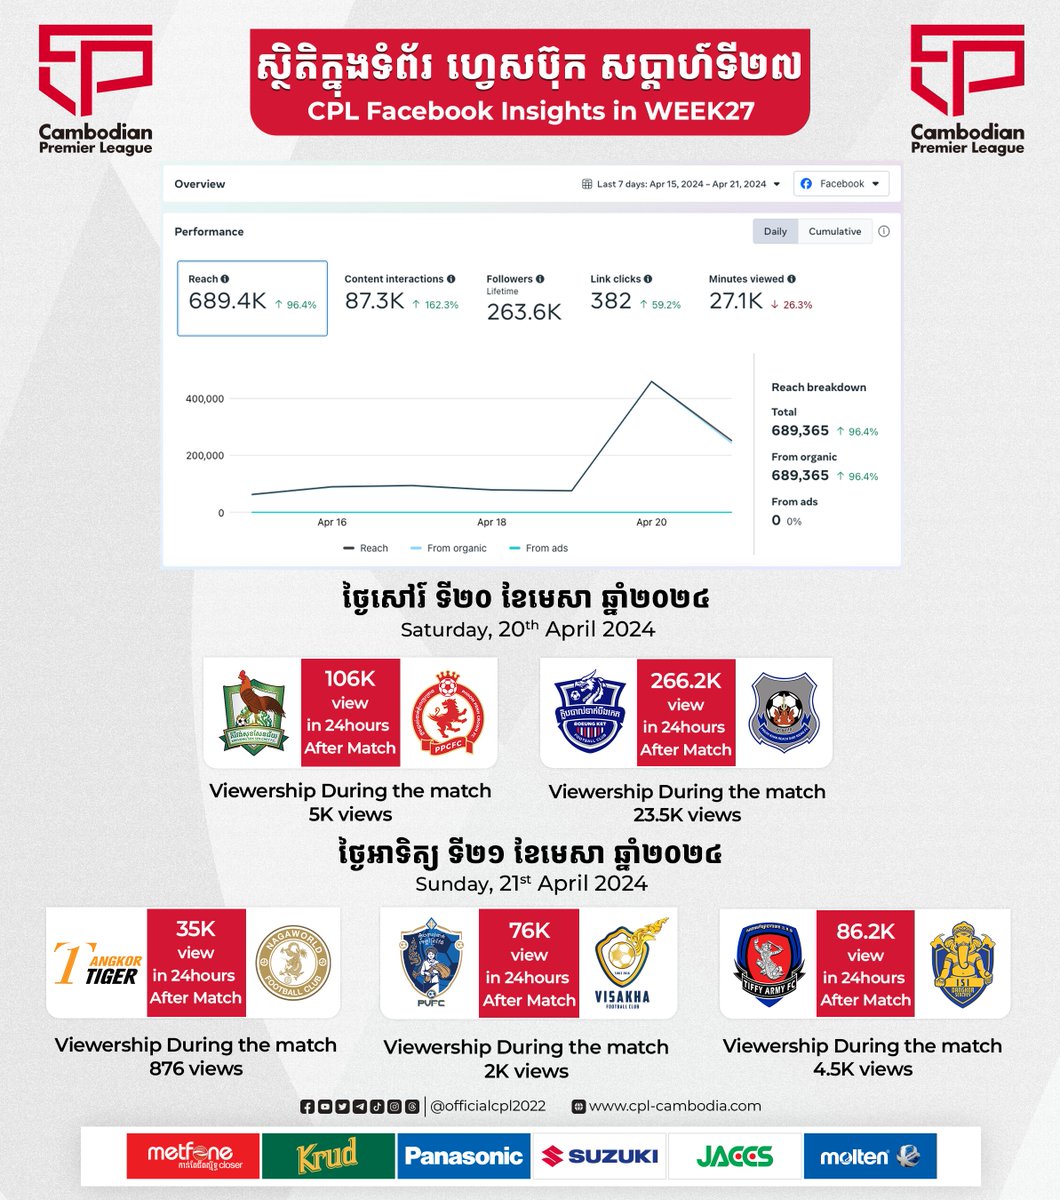 Cambodian Premier League 2023/24 🔴 CPL Facebook insight data after WEEK27 🔼 Let's support our local football club ⚽️ CPL Telegram: t.me/officialcpl2022 ⚡️ #CAMBODIANPREMIERLEAGUE #CPL2324 #CPL #FFC #Data #FacebookPage #Insight #WEEK27